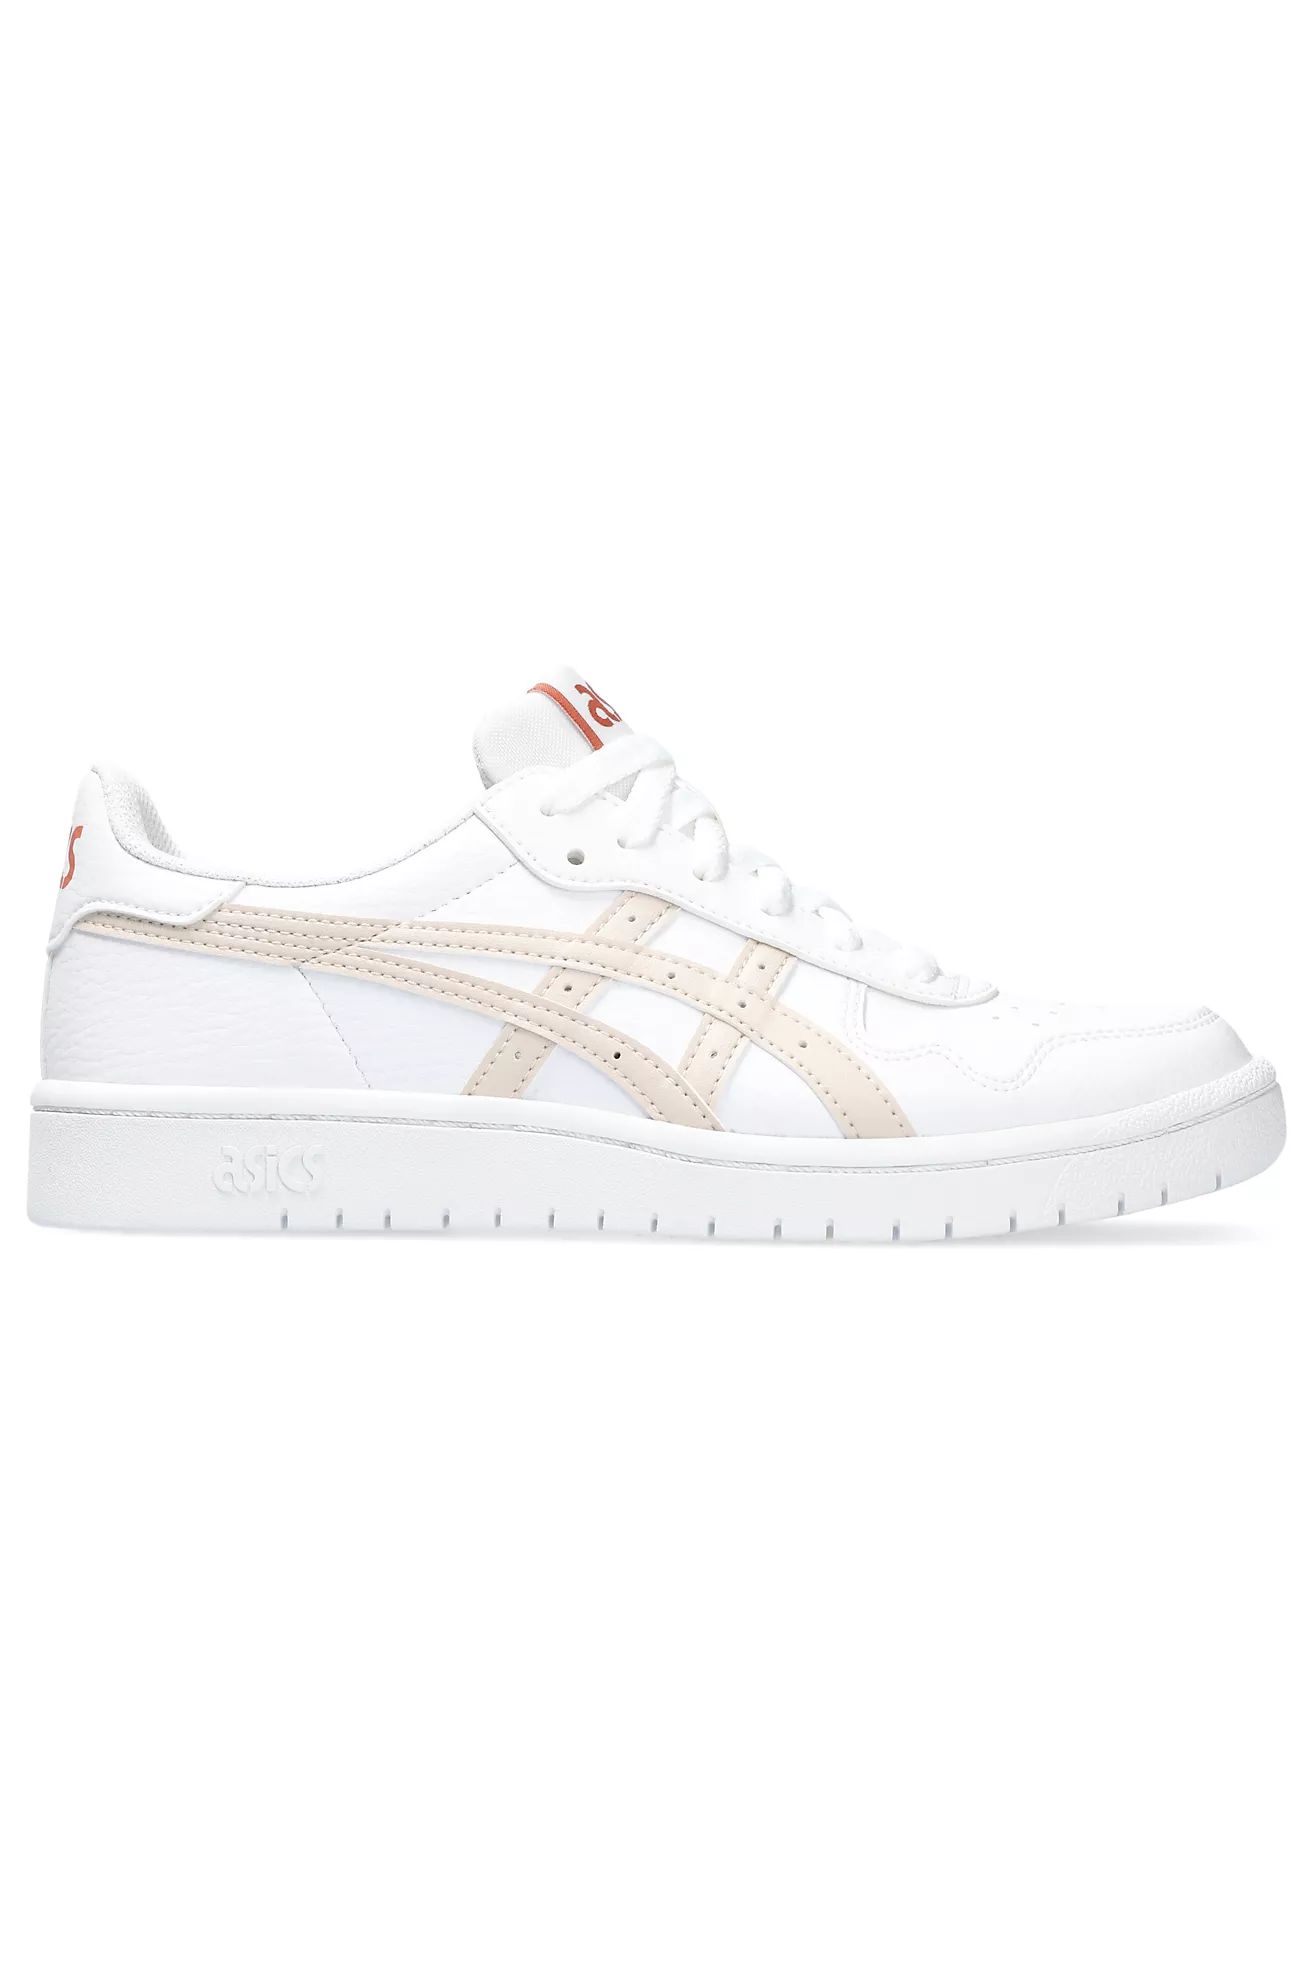 ASICS Japan S Sportstyle Sneakers | Anthropologie (US)